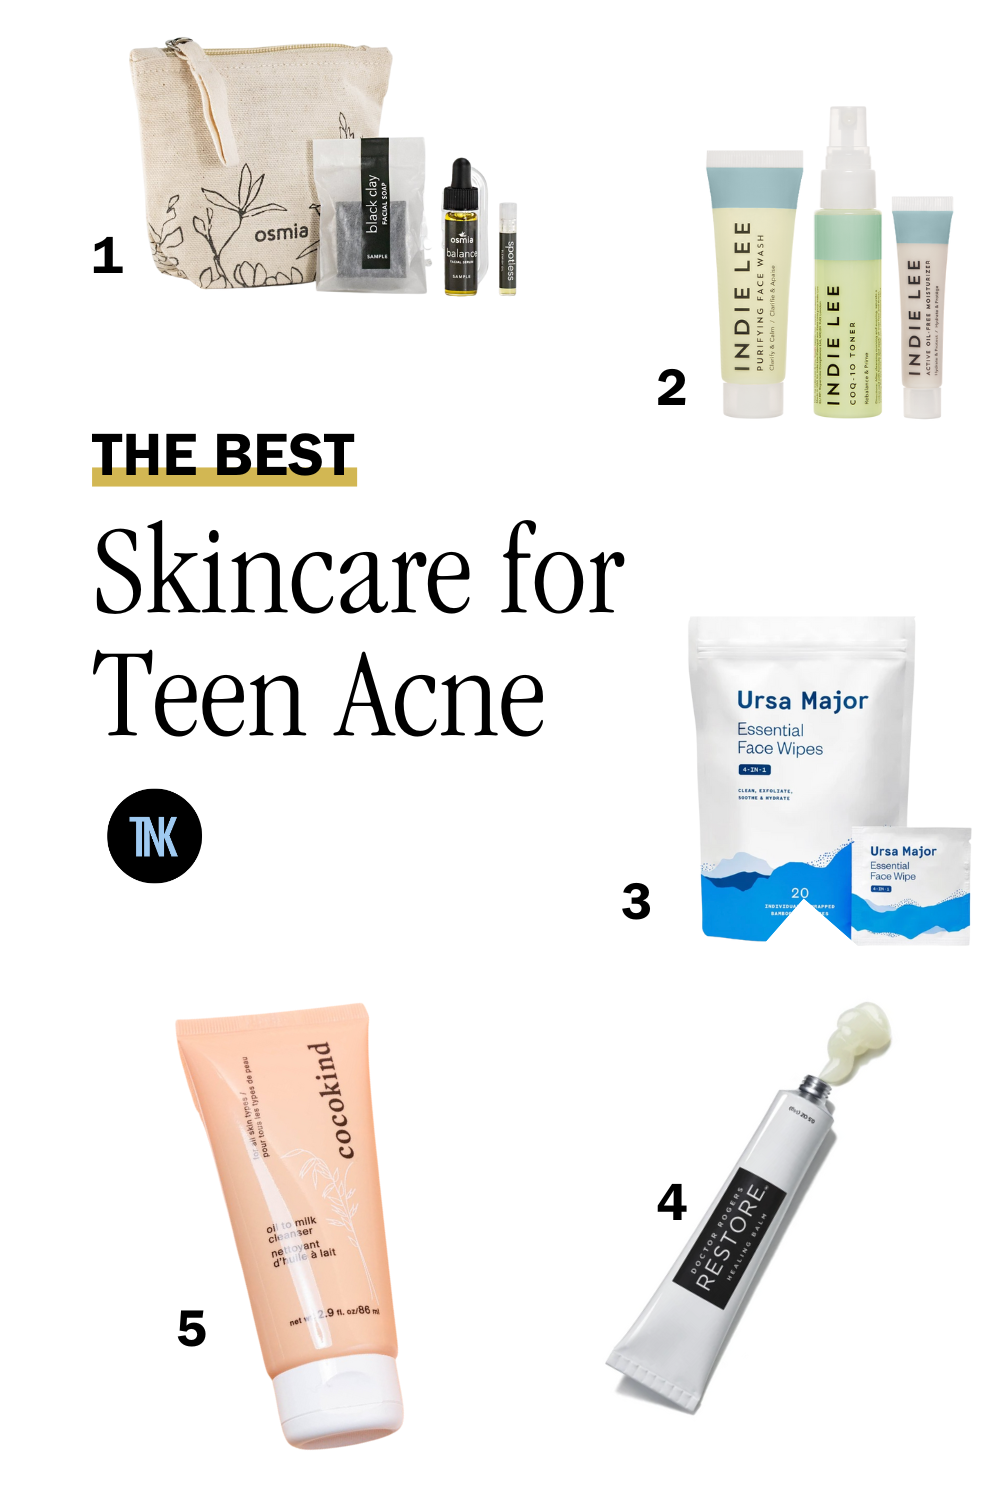 5 Skincare Routines & Teenage Acne Treatments 2023 | The New Knew